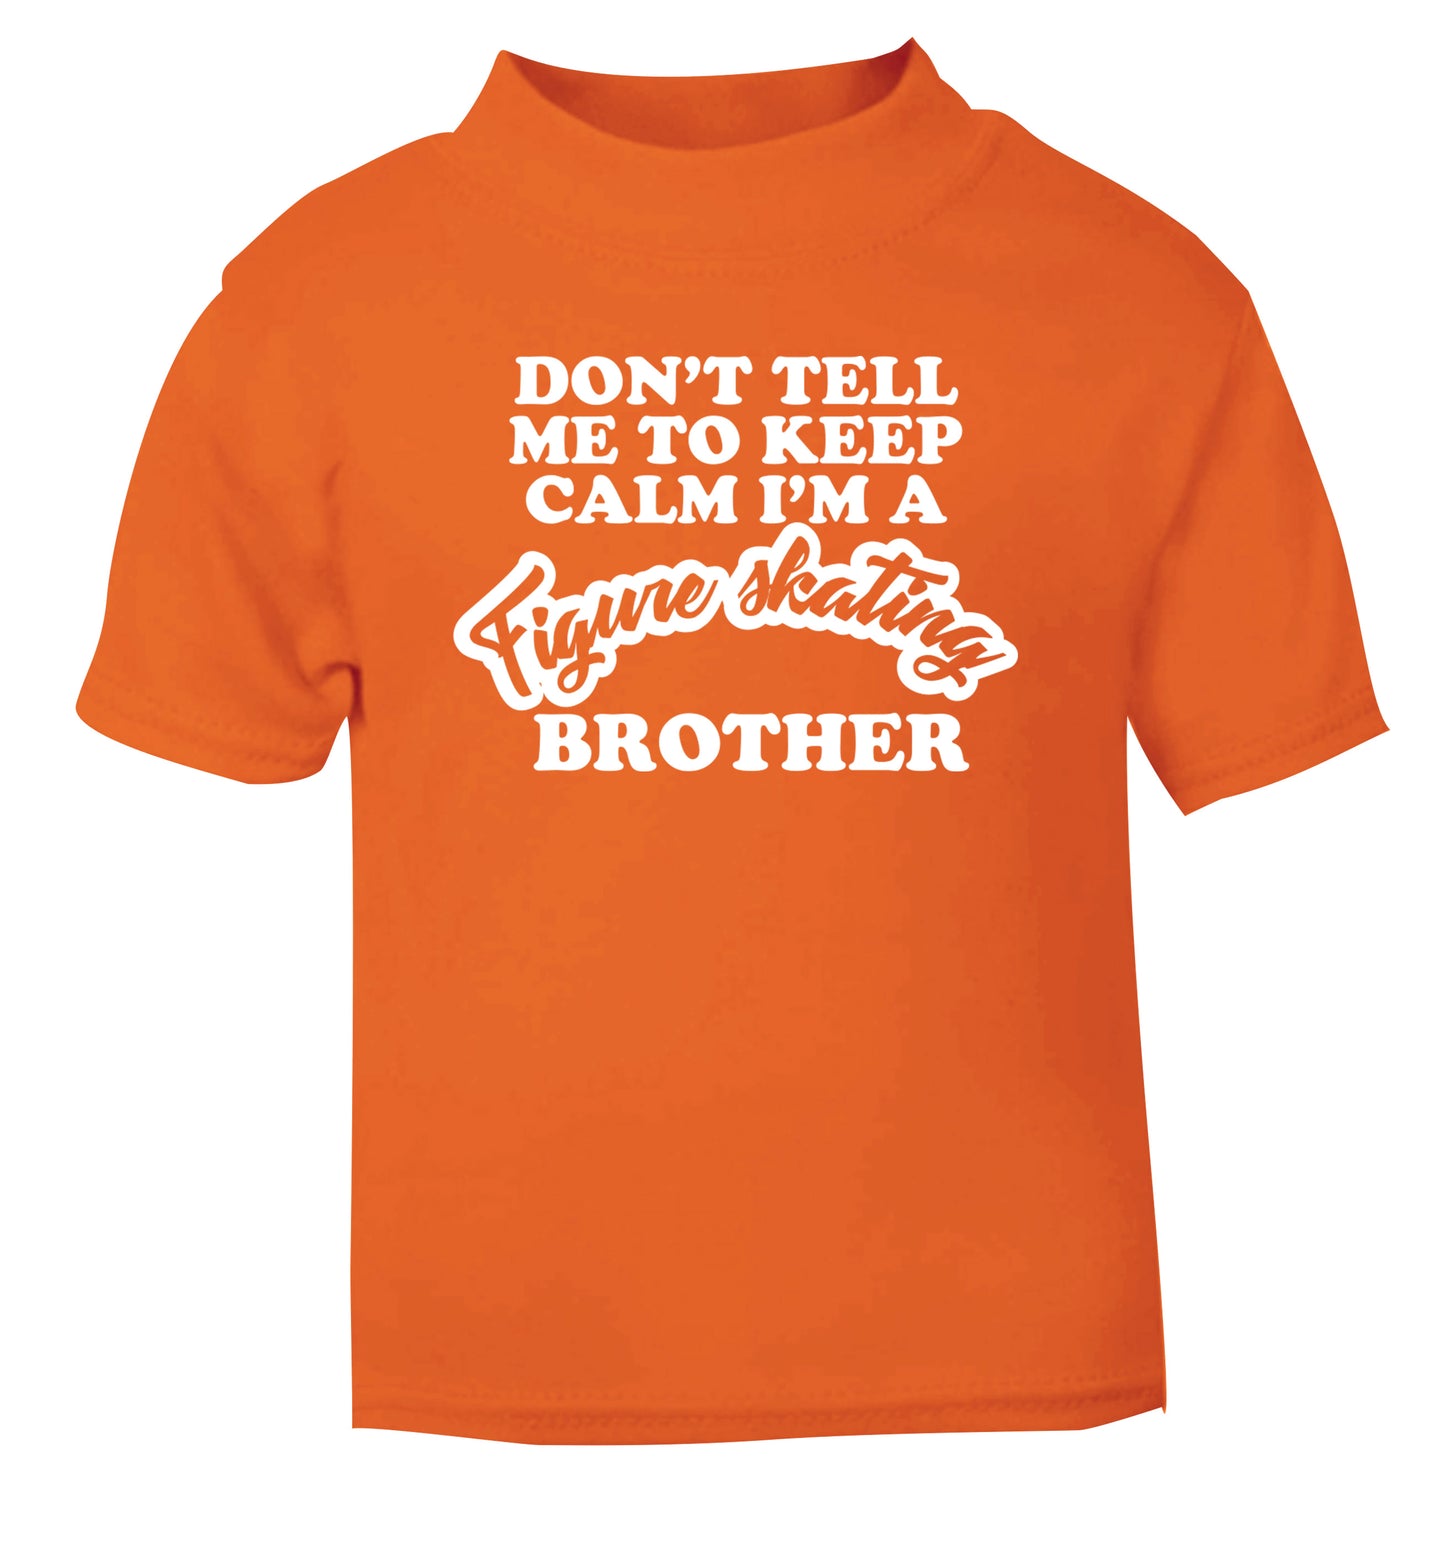 Don't tell me to keep calm I'm a figure skating brother orange Baby Toddler Tshirt 2 Years